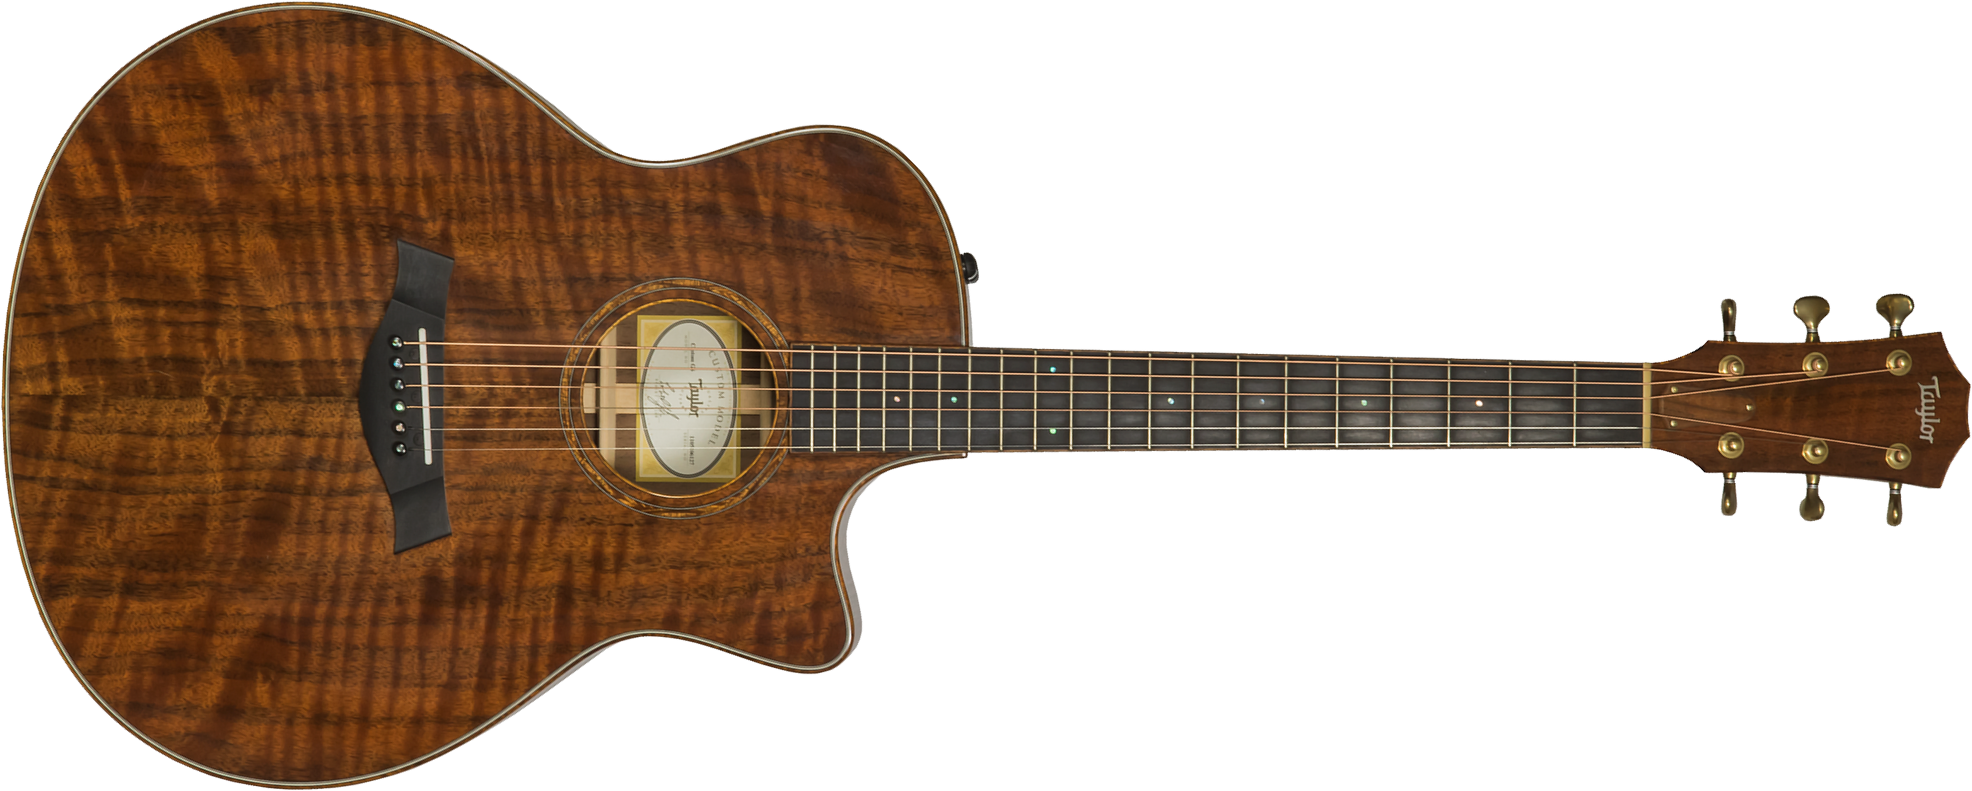 Taylor Gs-e Custom Grand Symphony Cw Tout Noyer Es2 #b9675 - Natural - Westerngitarre & electro - Main picture